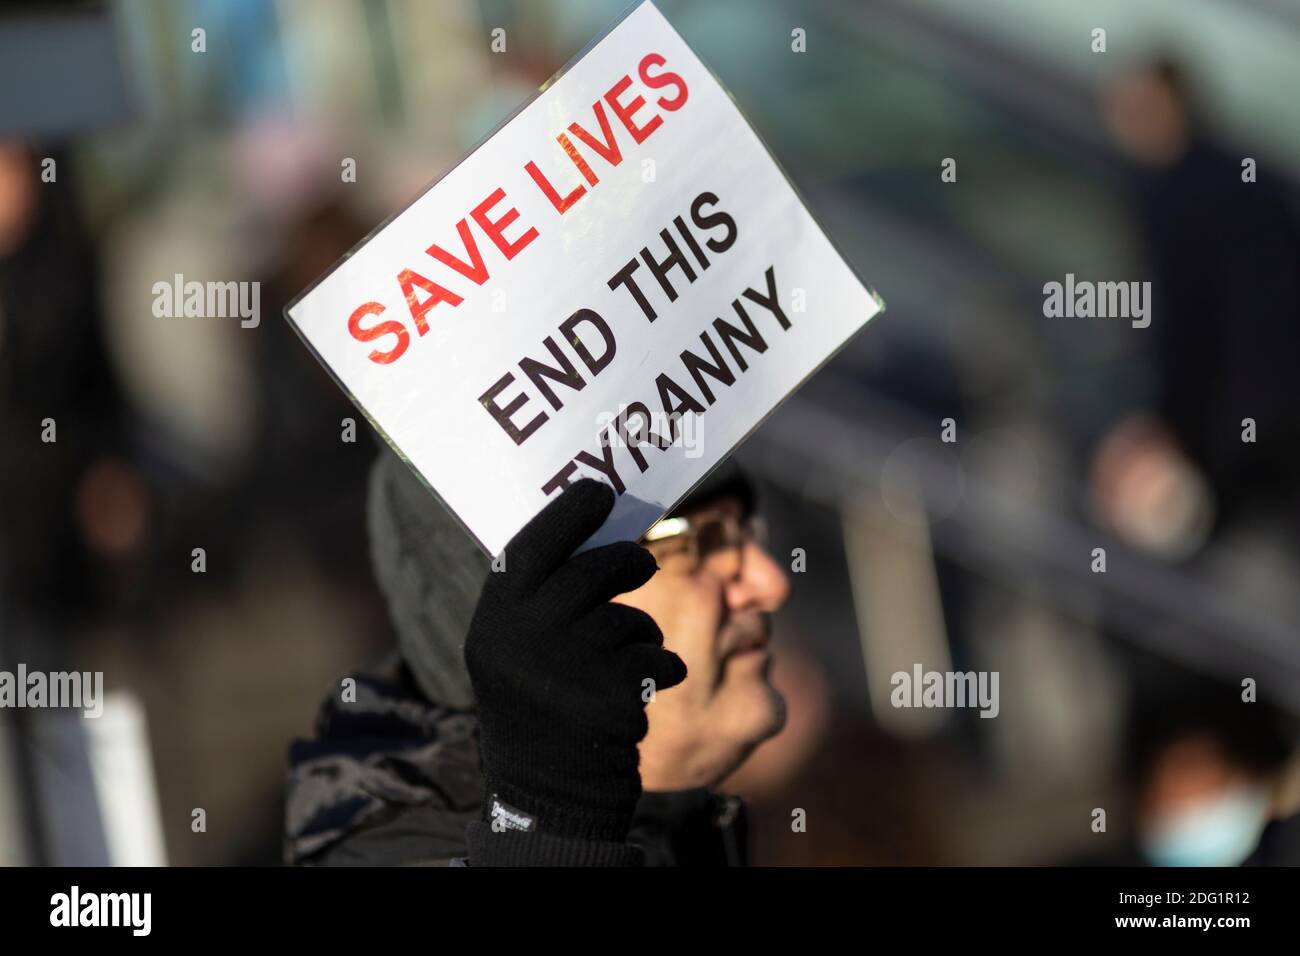 Anti-lockdown protest in Stratford, London, 5 December 2020. Close-up view of a protester's placard. Stock Photo